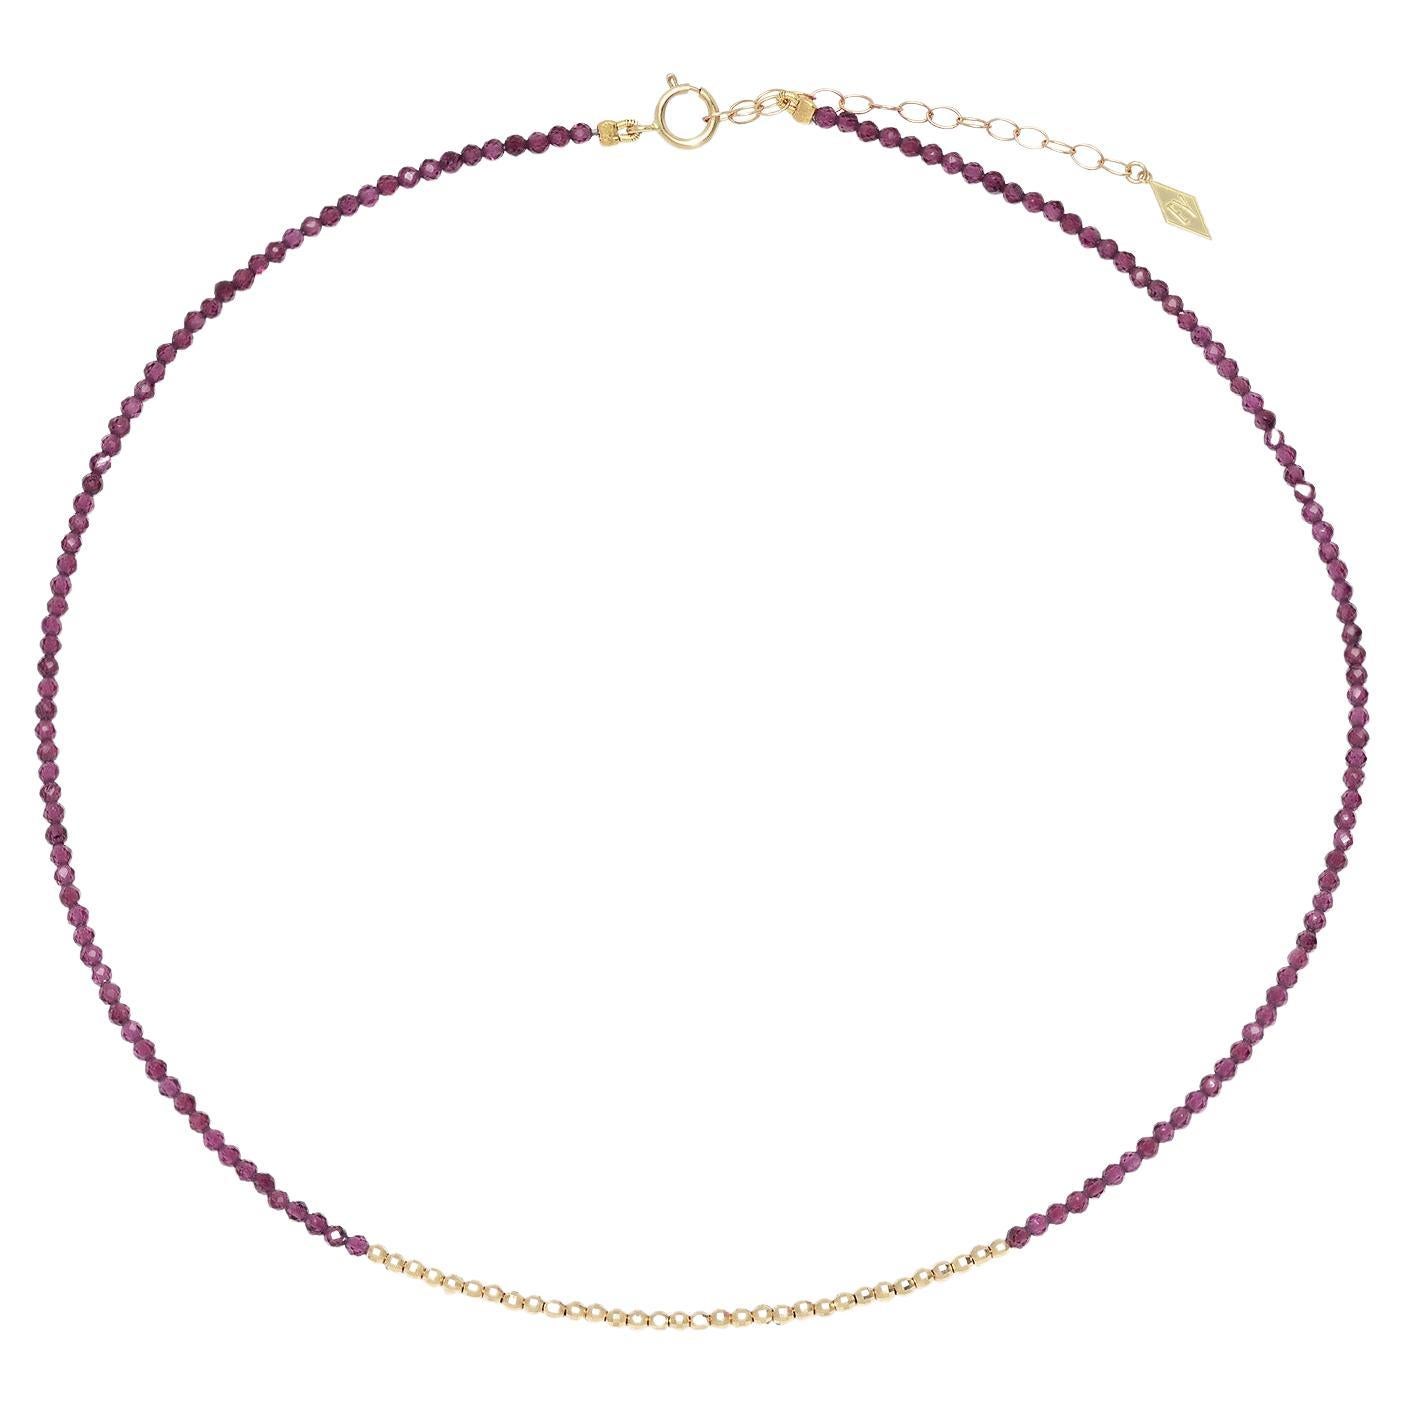 The "Glimmer Choker" with Yellow Gold and Garnet